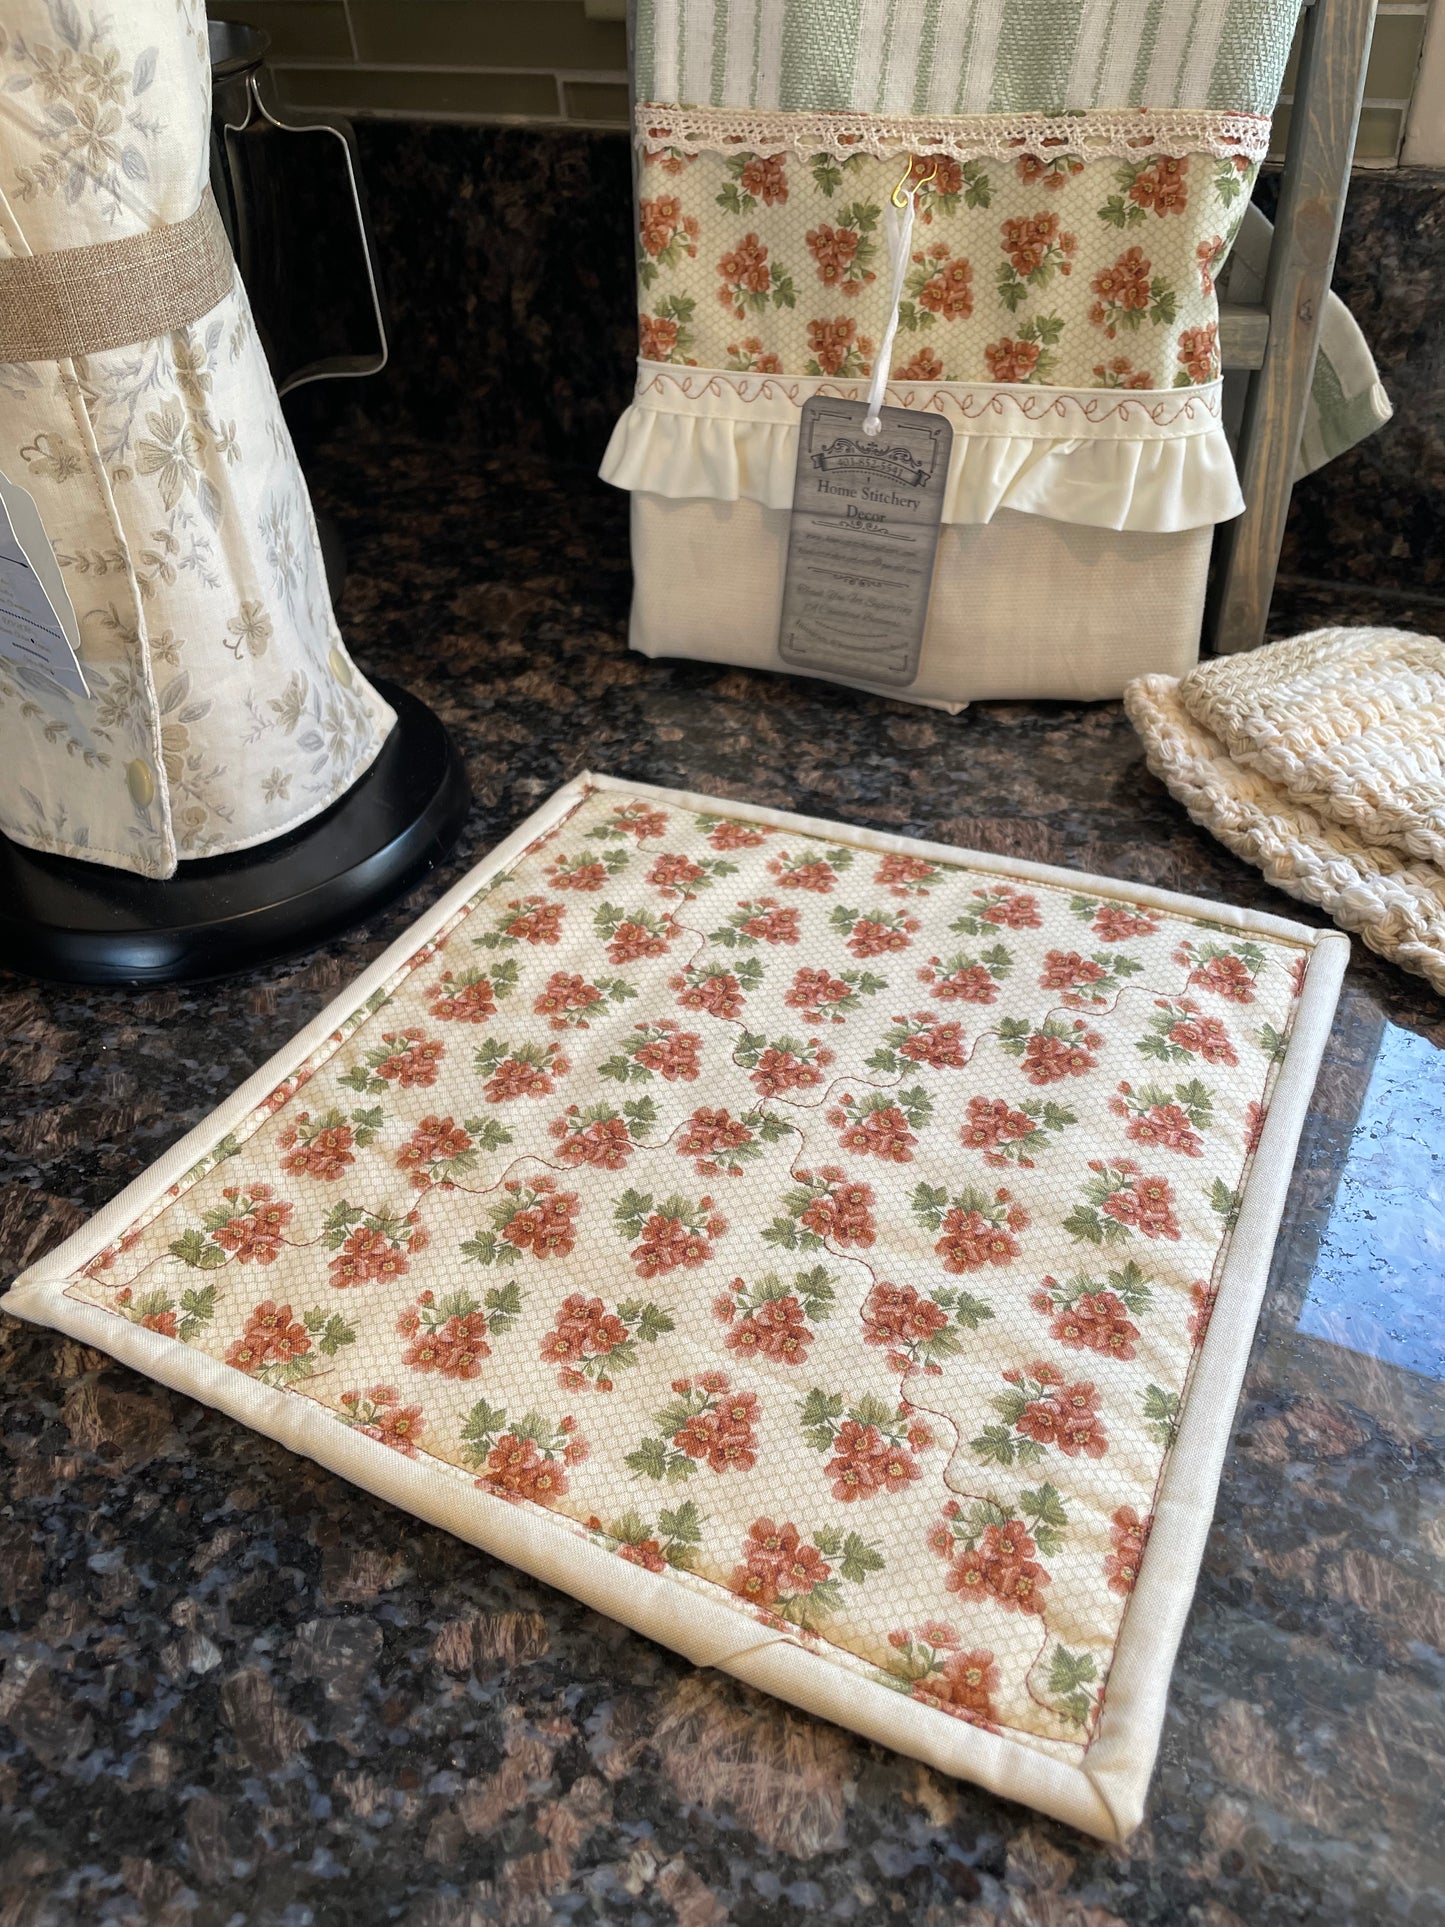 Modern Farmhouse Styled Pot Holder. Part of a mix and match collection of farmhouse kitchen decor. Browse the collections and follow along on the Home Stitchery Decor YouTube Channel